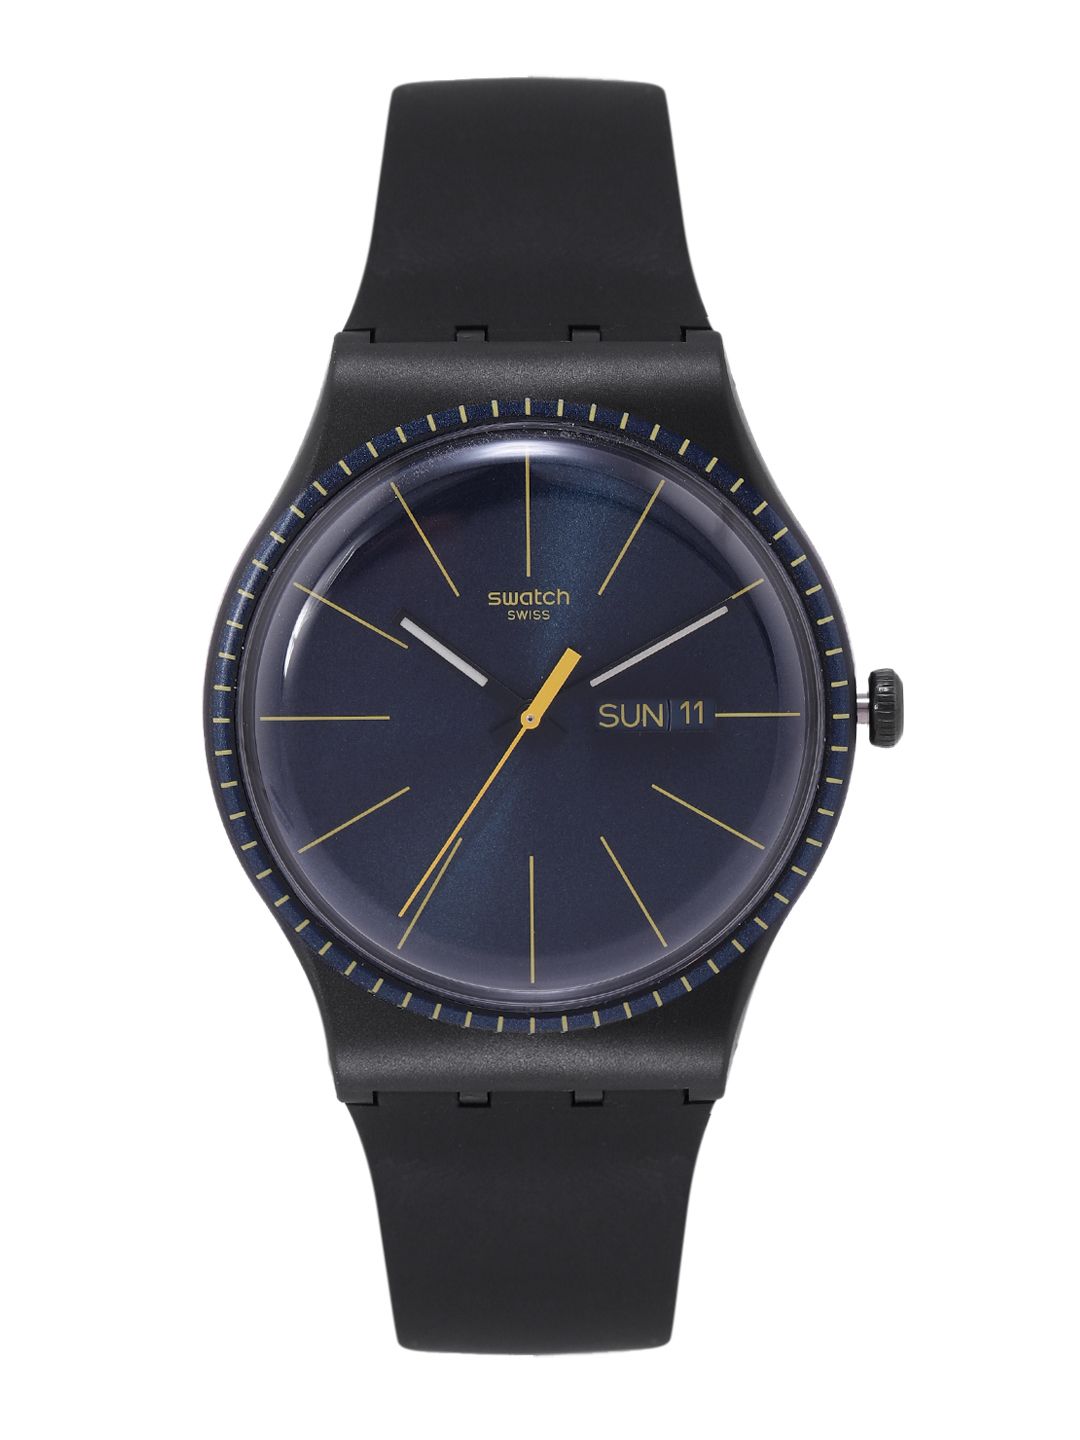 Swatch Unisex Navy Blue Swiss Black Rails Water Resistant Analogue Watch SUOB731 Price in India